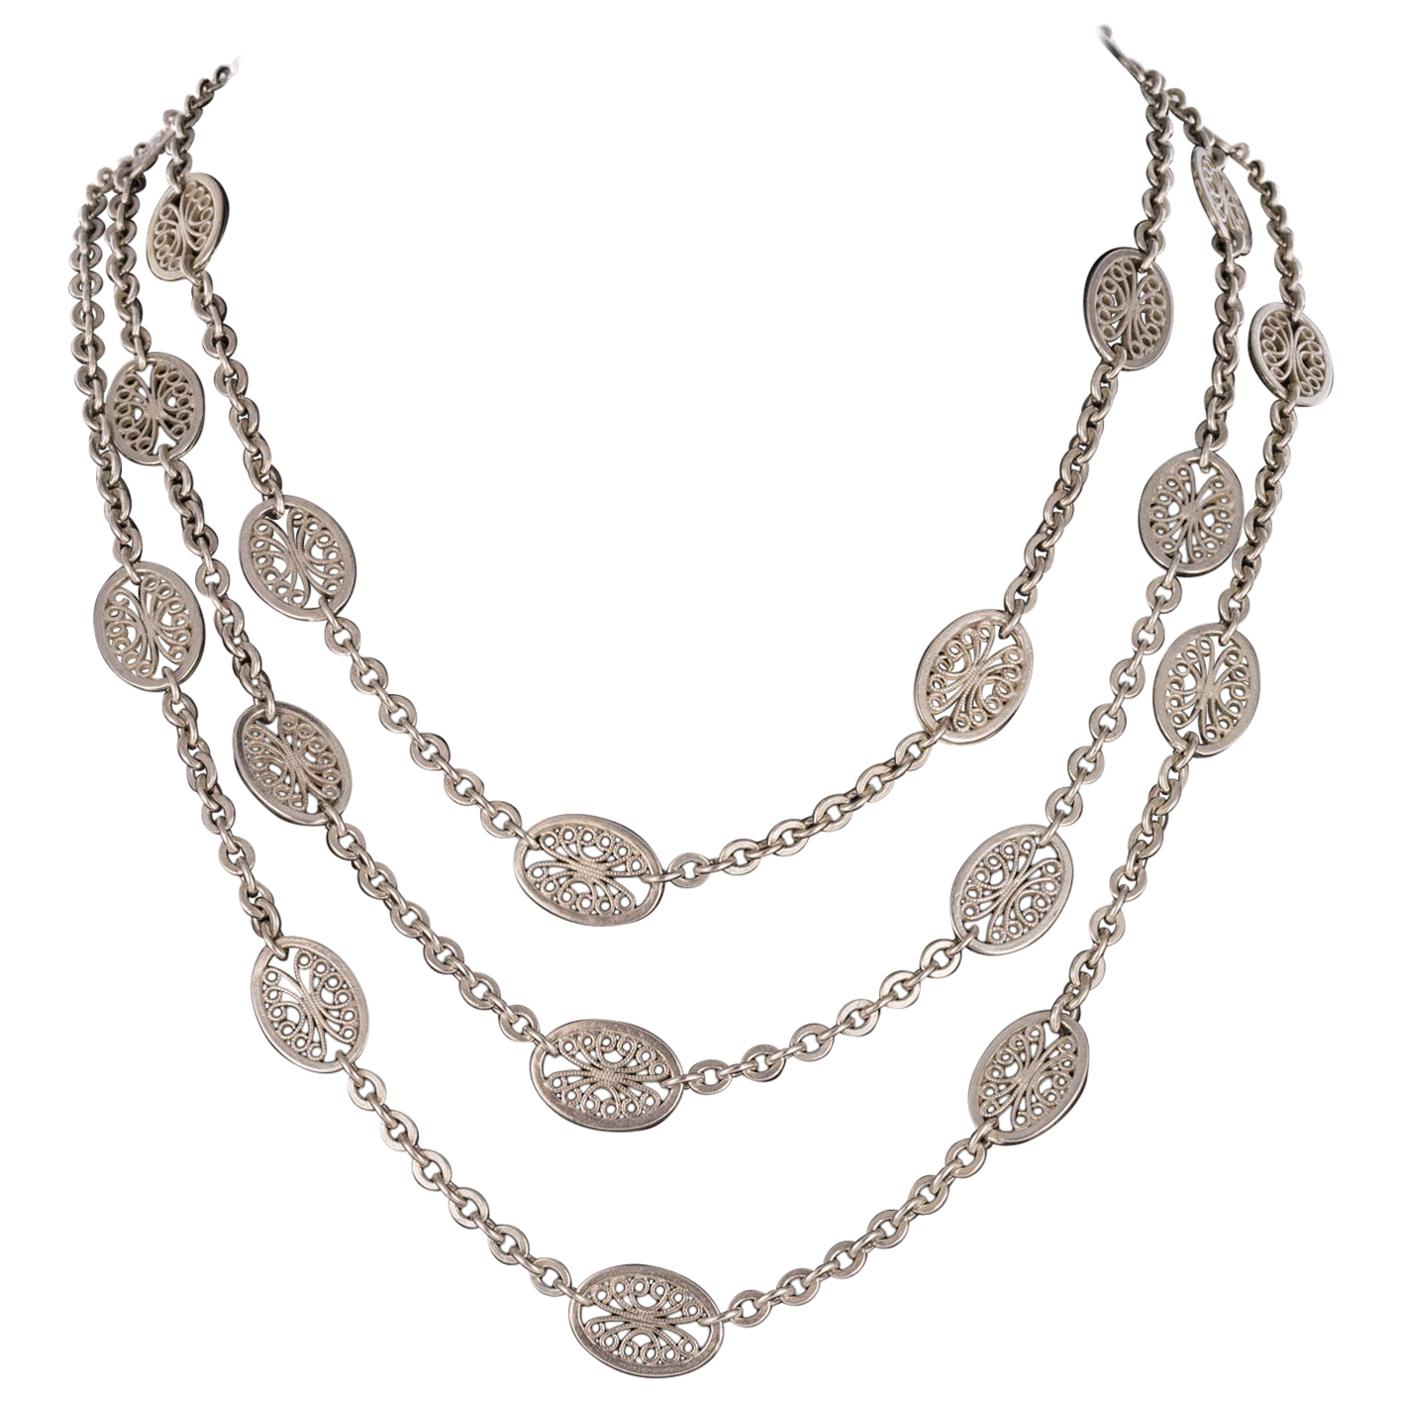 French 1900s Silver Filigree Long Necklace